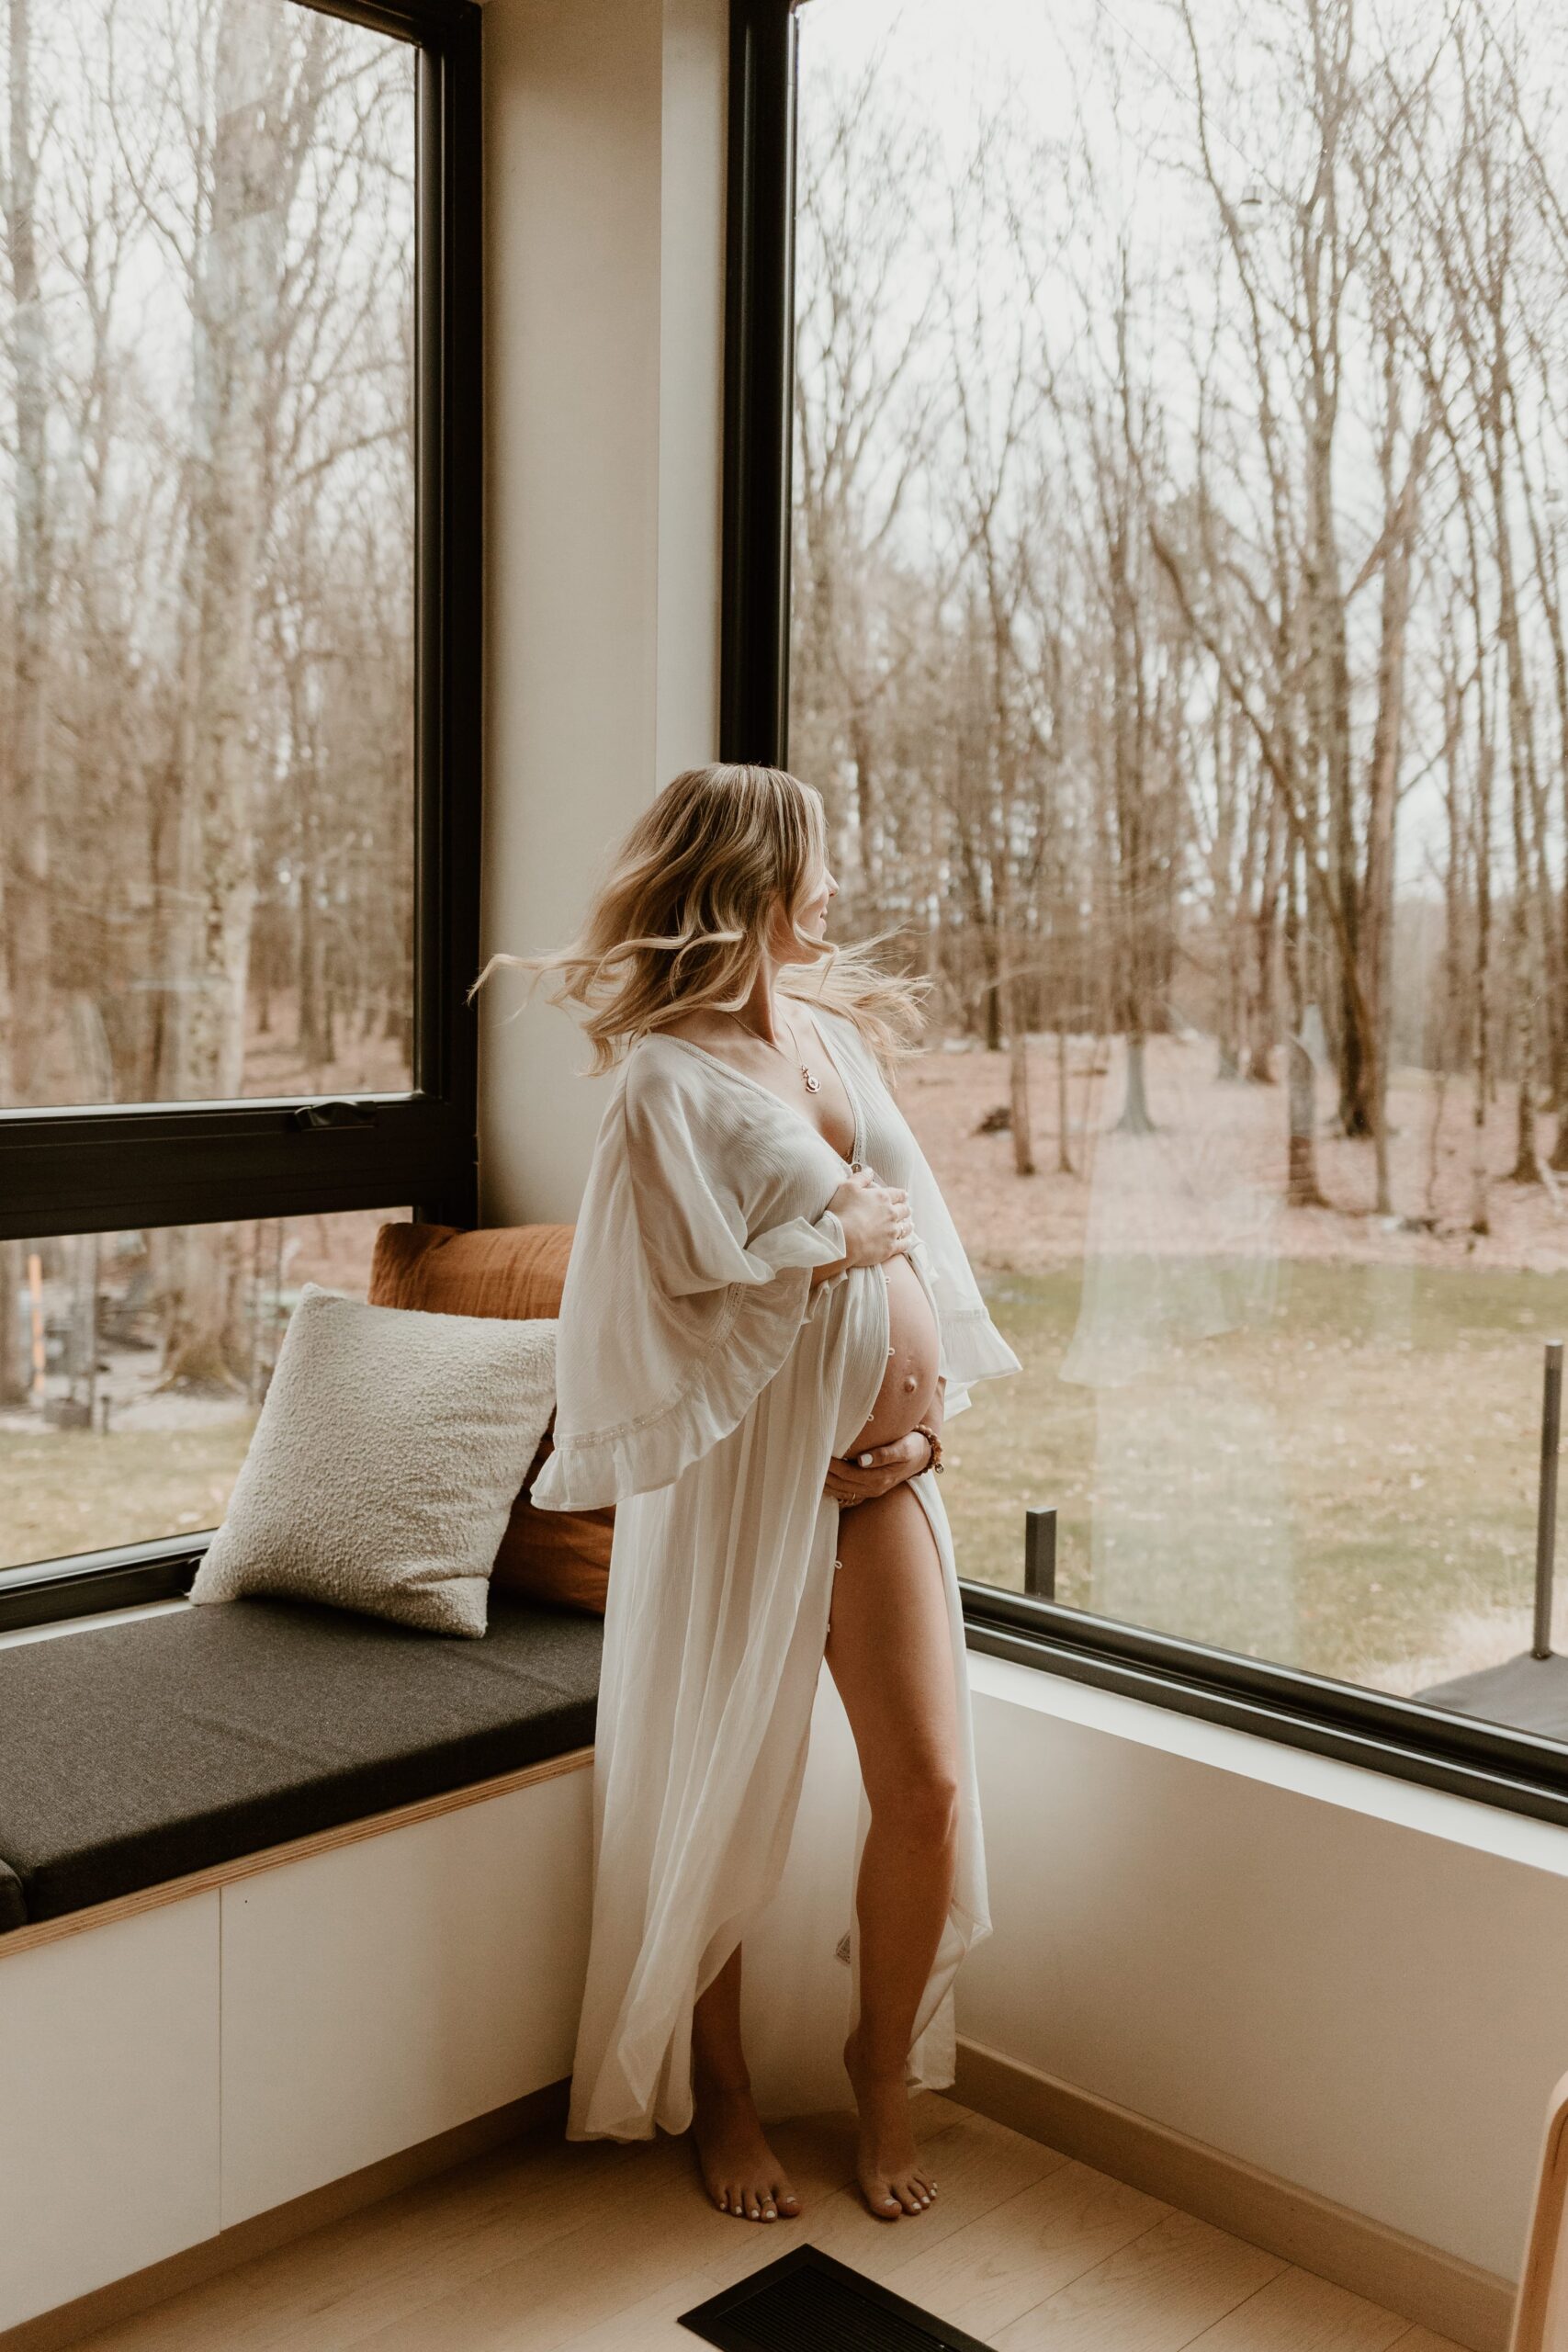 A serene Hudson Valley maternity photographer captures a pregnant woman in a delicate white robe, standing by a large window overlooking a bare winter forest.